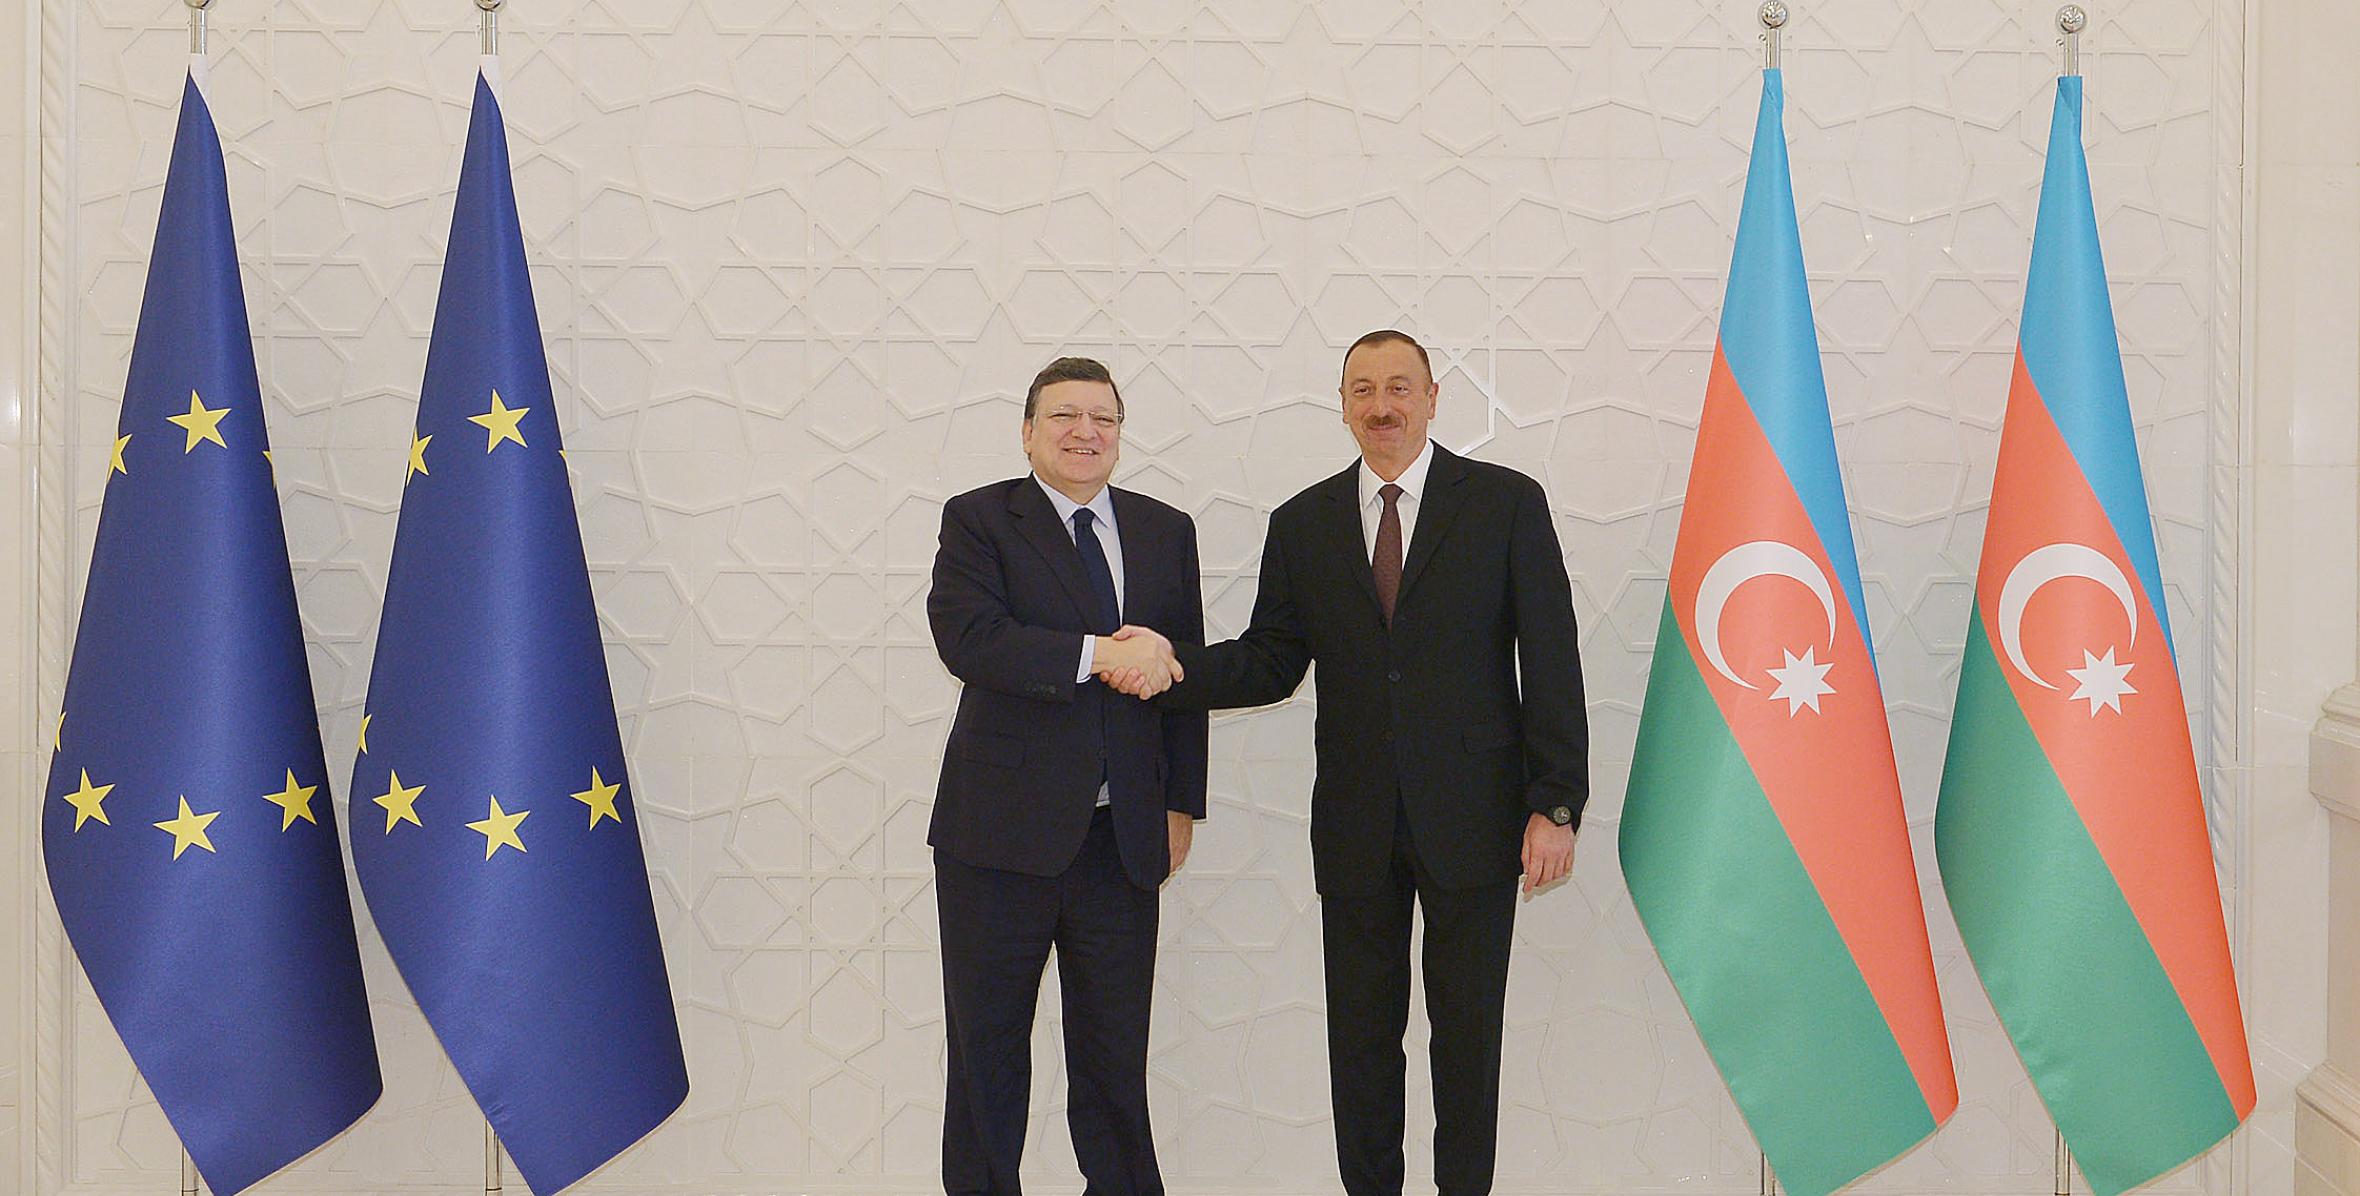 Ilham Aliyev held a one-on-one meeting with President of the European Commission Jose Manuel Barroso